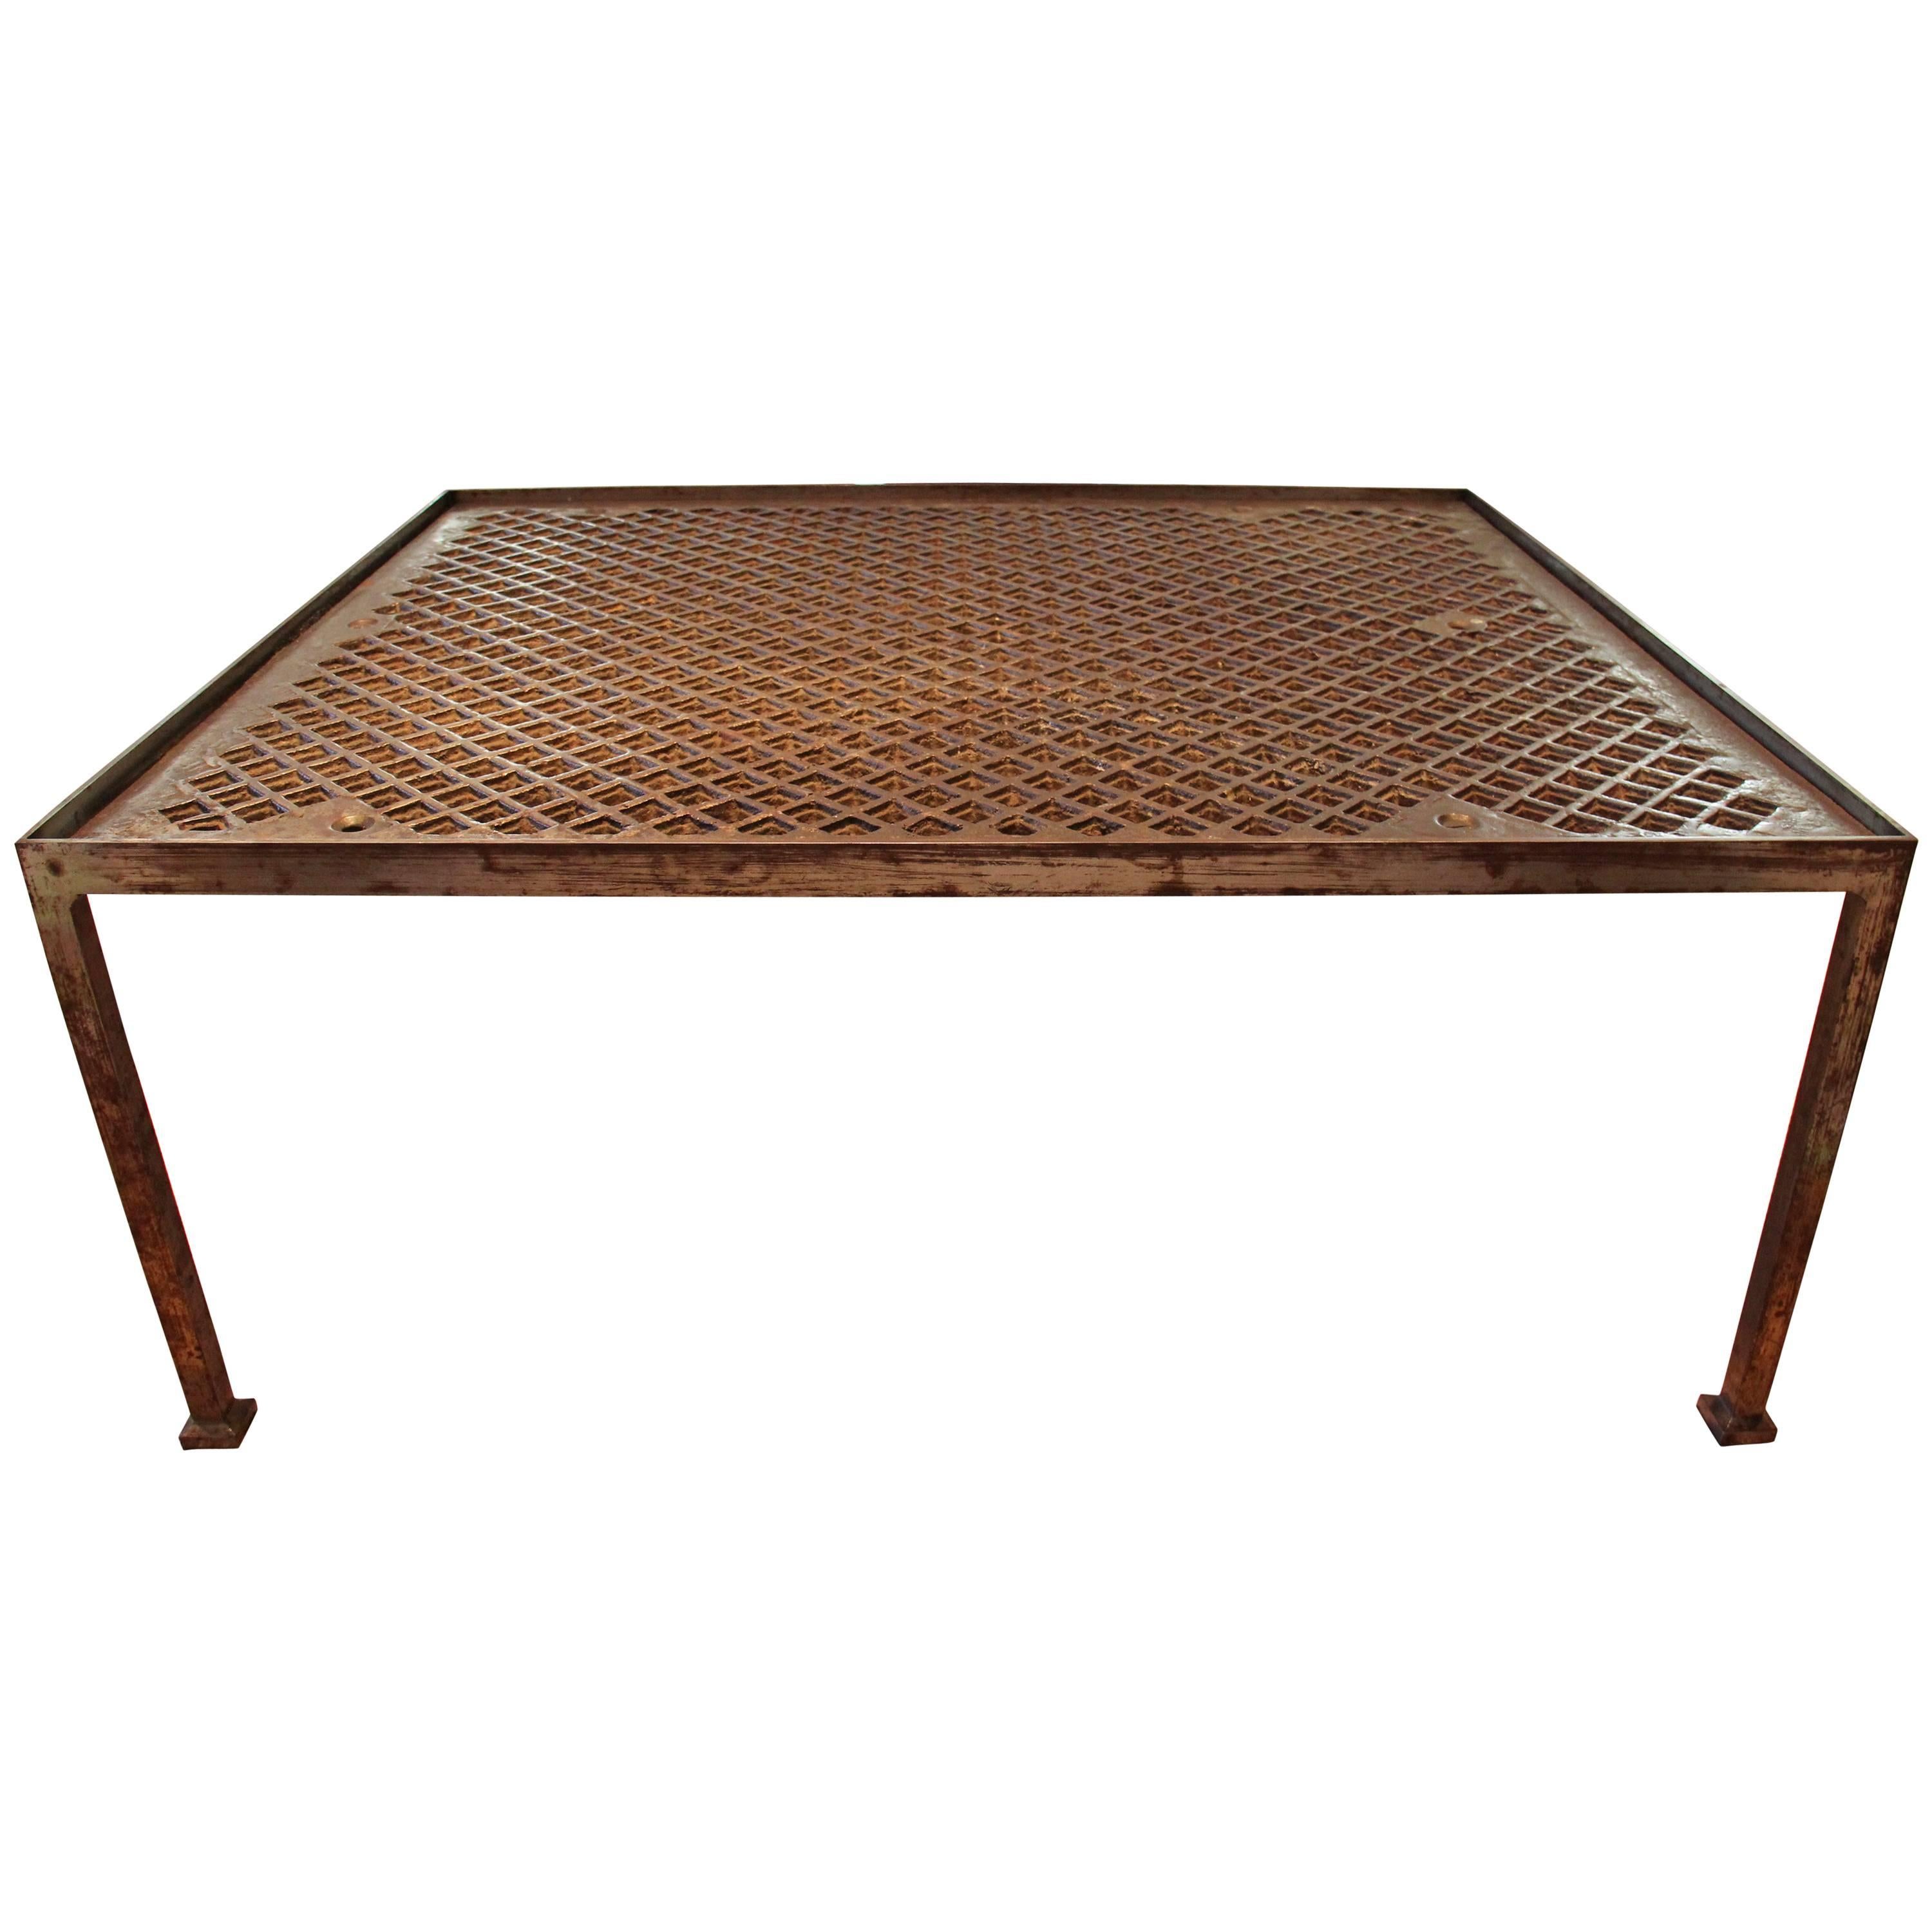 A circa 1960 iron Mid-Century Modern coffee table that came from the estate of an artist in upstate New York.  The iron industrial grate top is circa 1940.  This table would be perfect indoors or outdoors as a coffee table for the patio or loggia.  